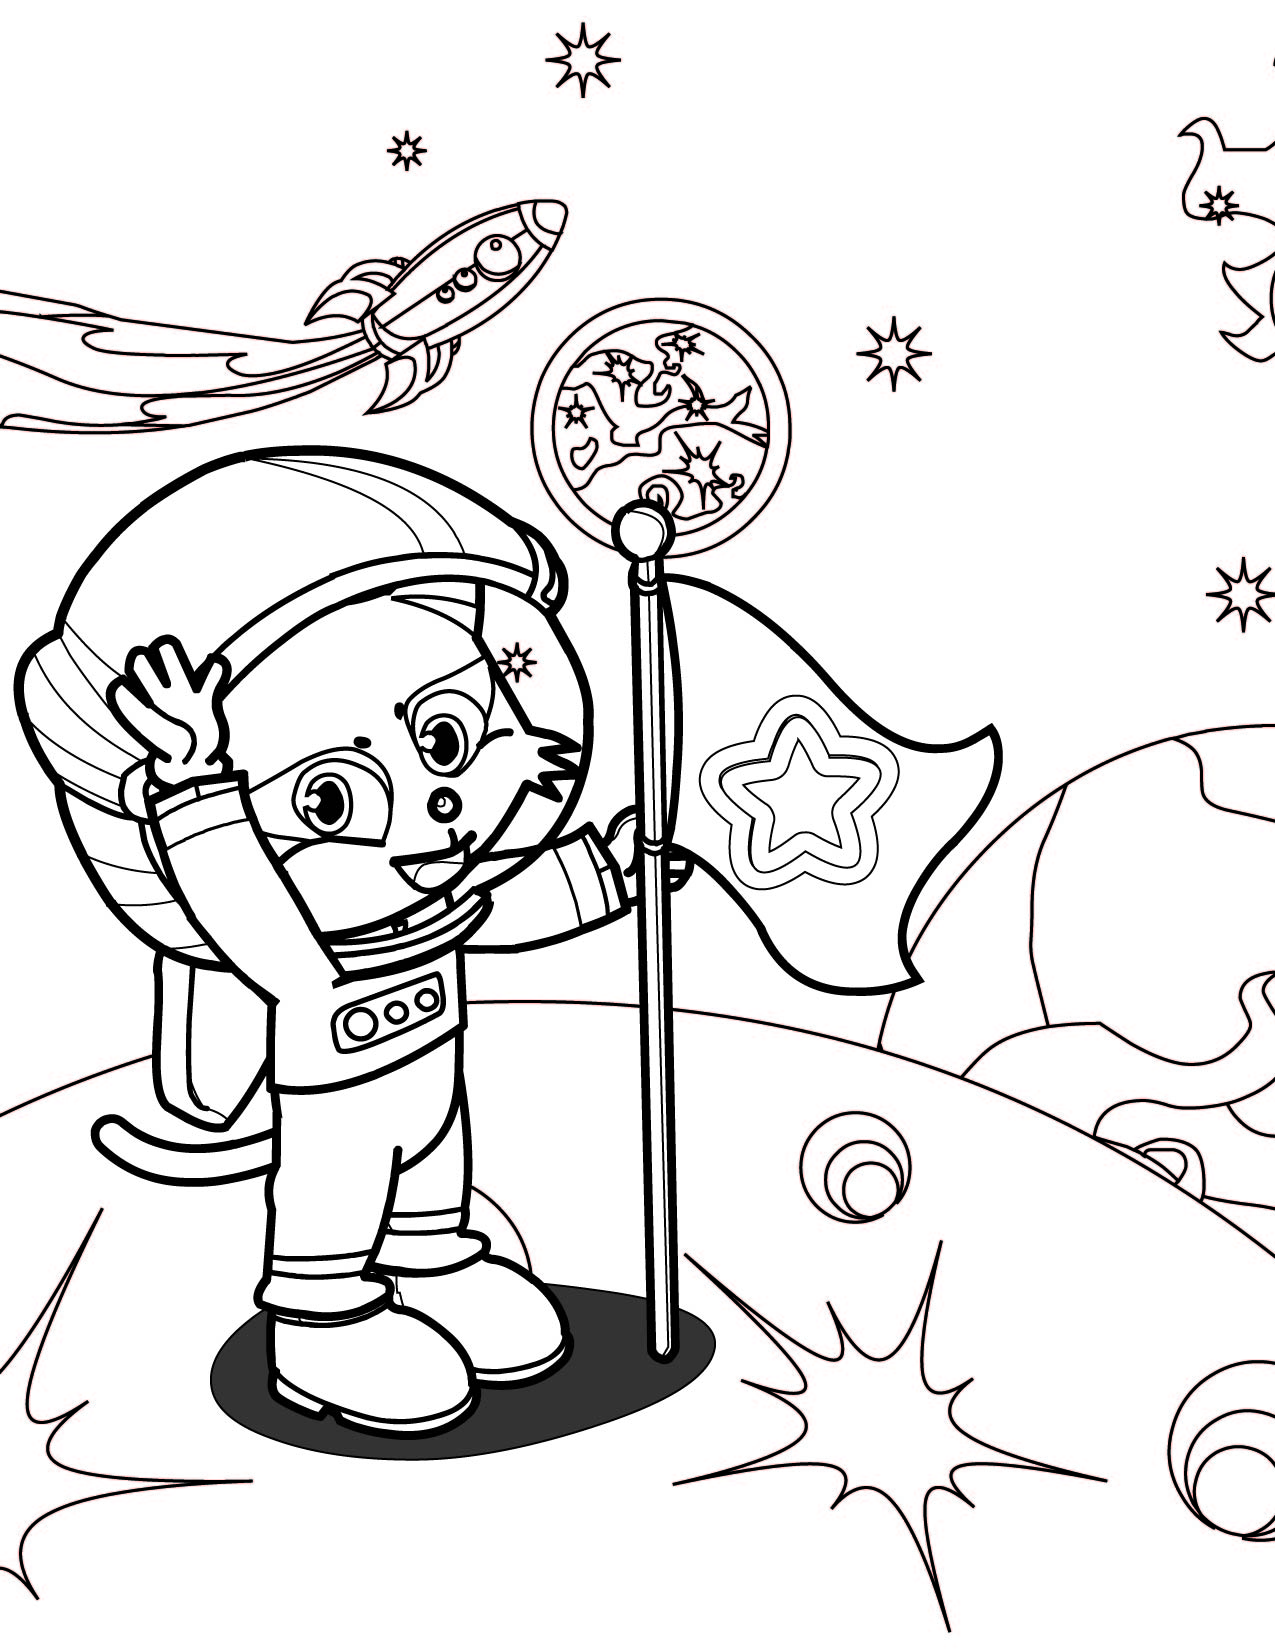 Astronaut For Kids Coloring Page